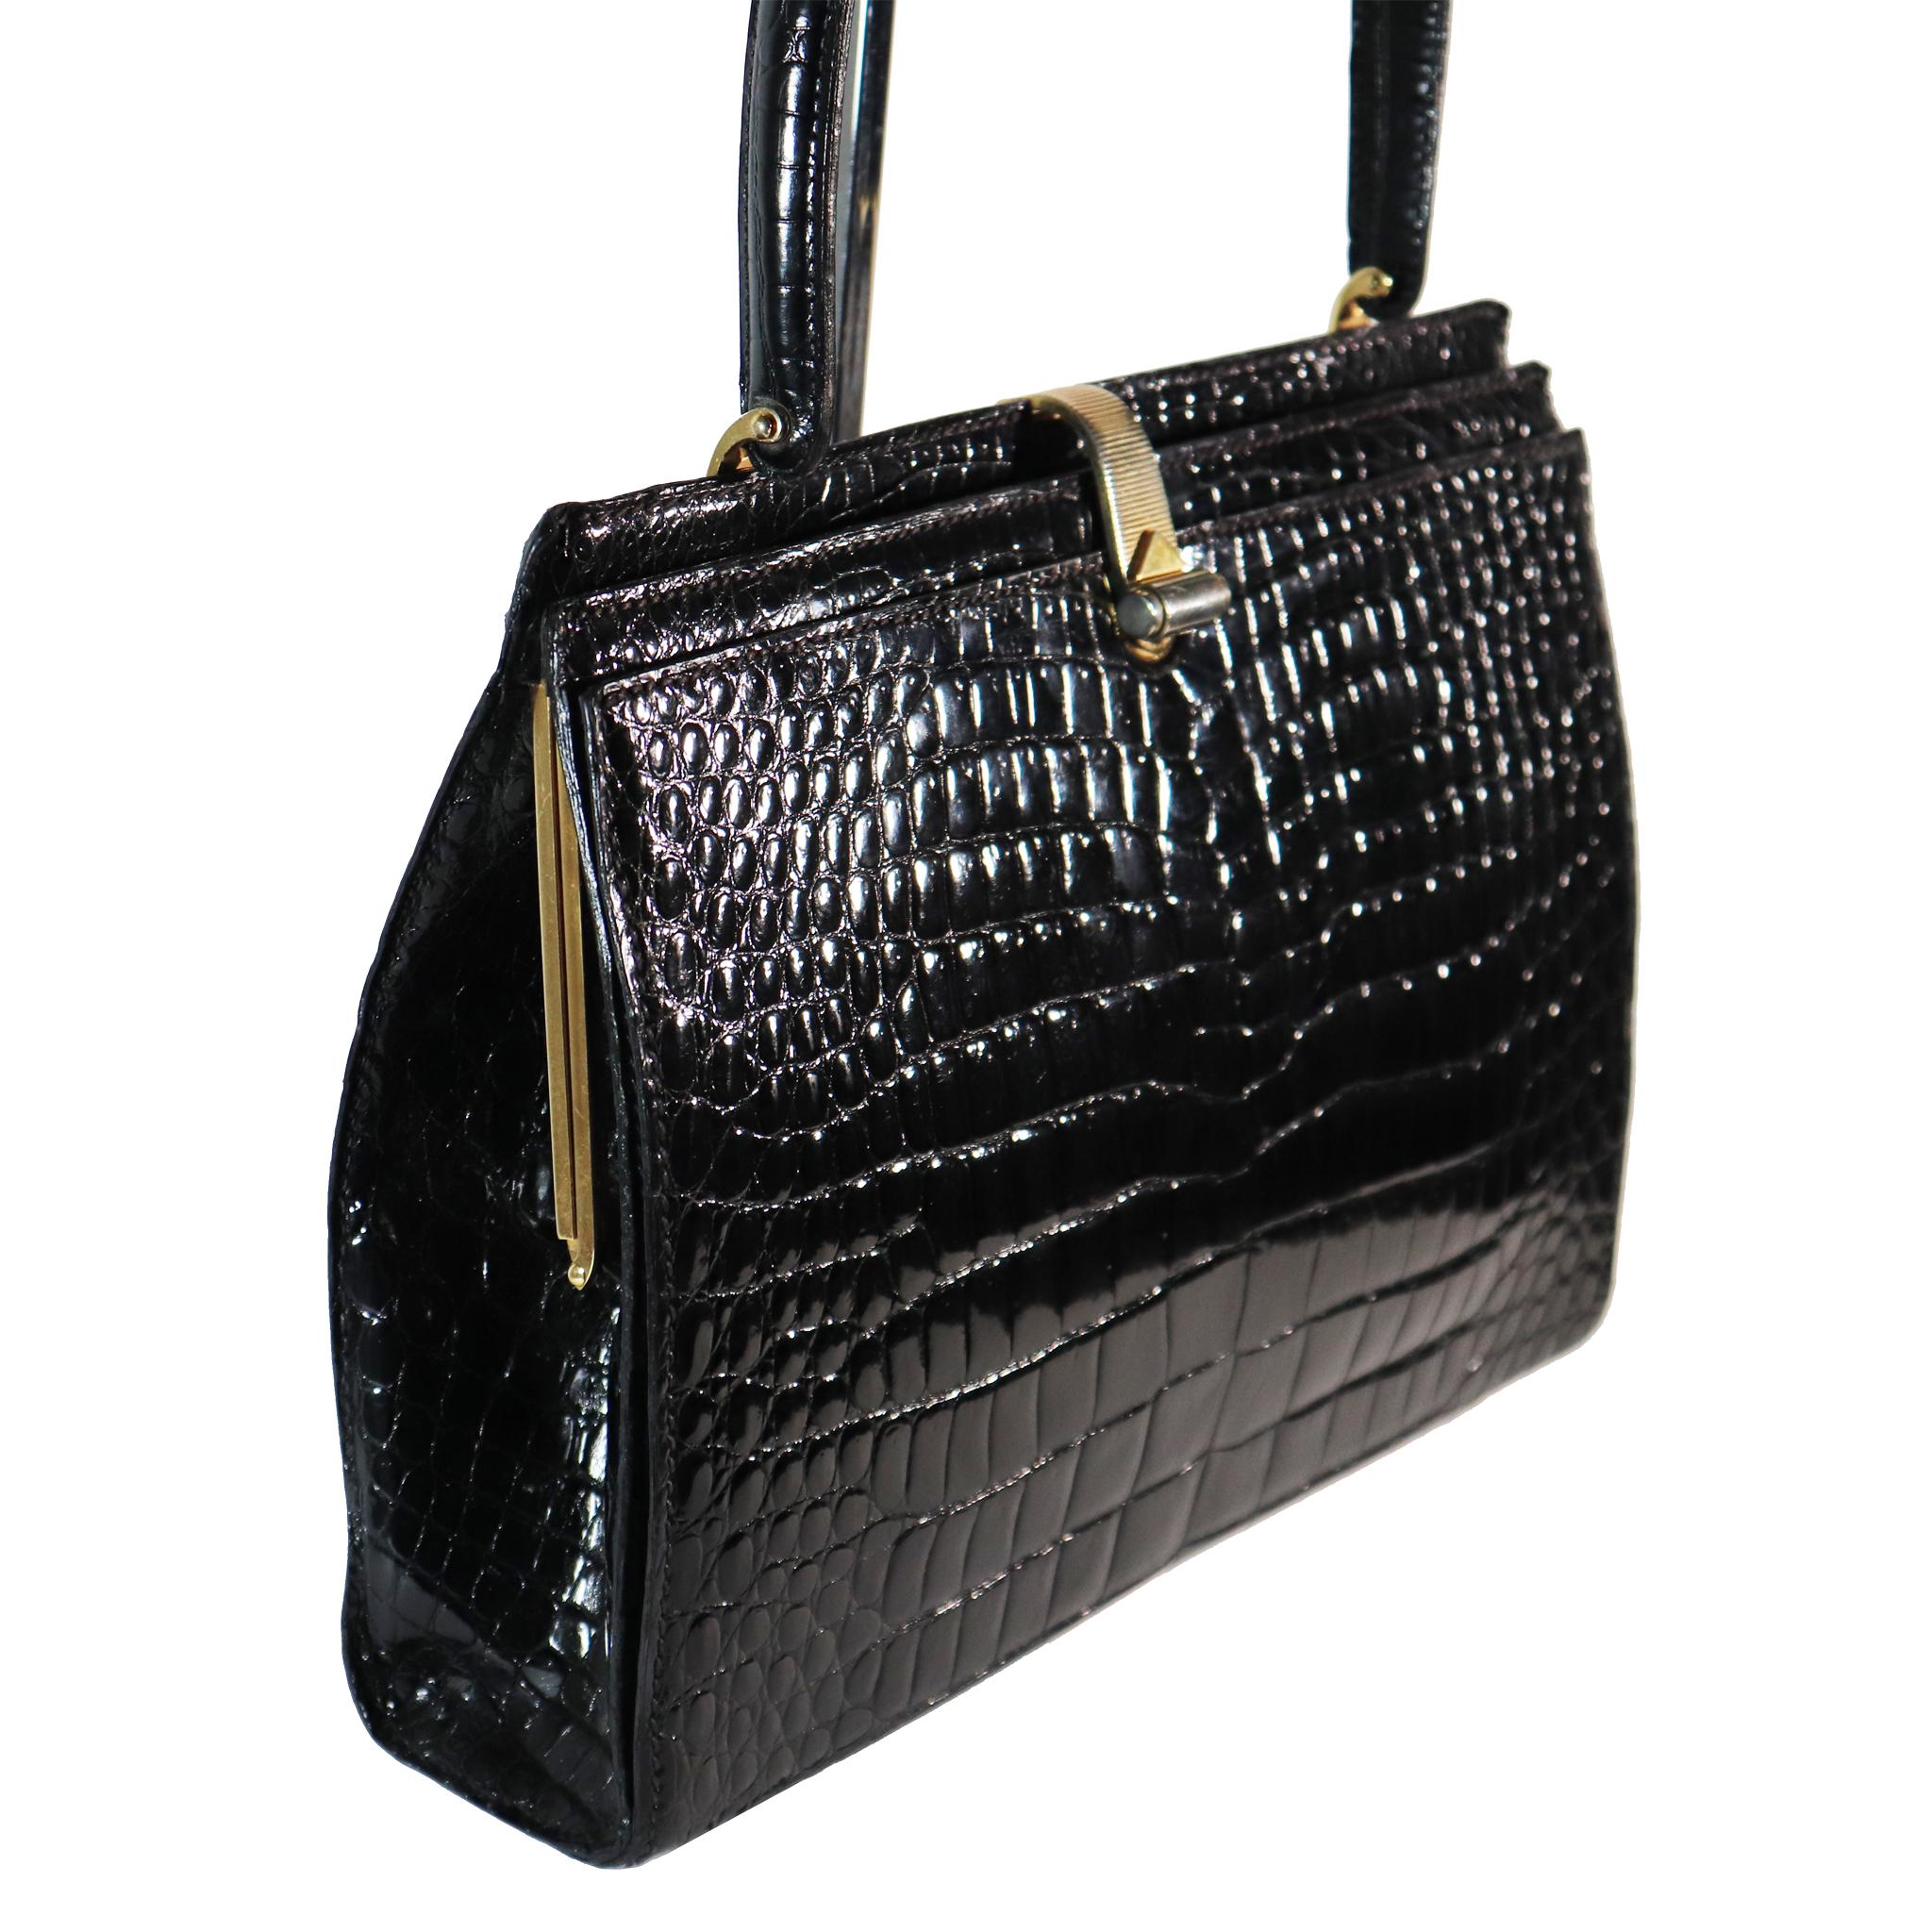 Lederer Black Alligator Purse W/ Gold Hardware & Expandable Frame. In Excellent condition 

Very Rare and Stylish handbag 

Measurements: 

Height - 8.5 Inches 
Width - 11 Inches 
Height - Strap - 14.5 Inches 